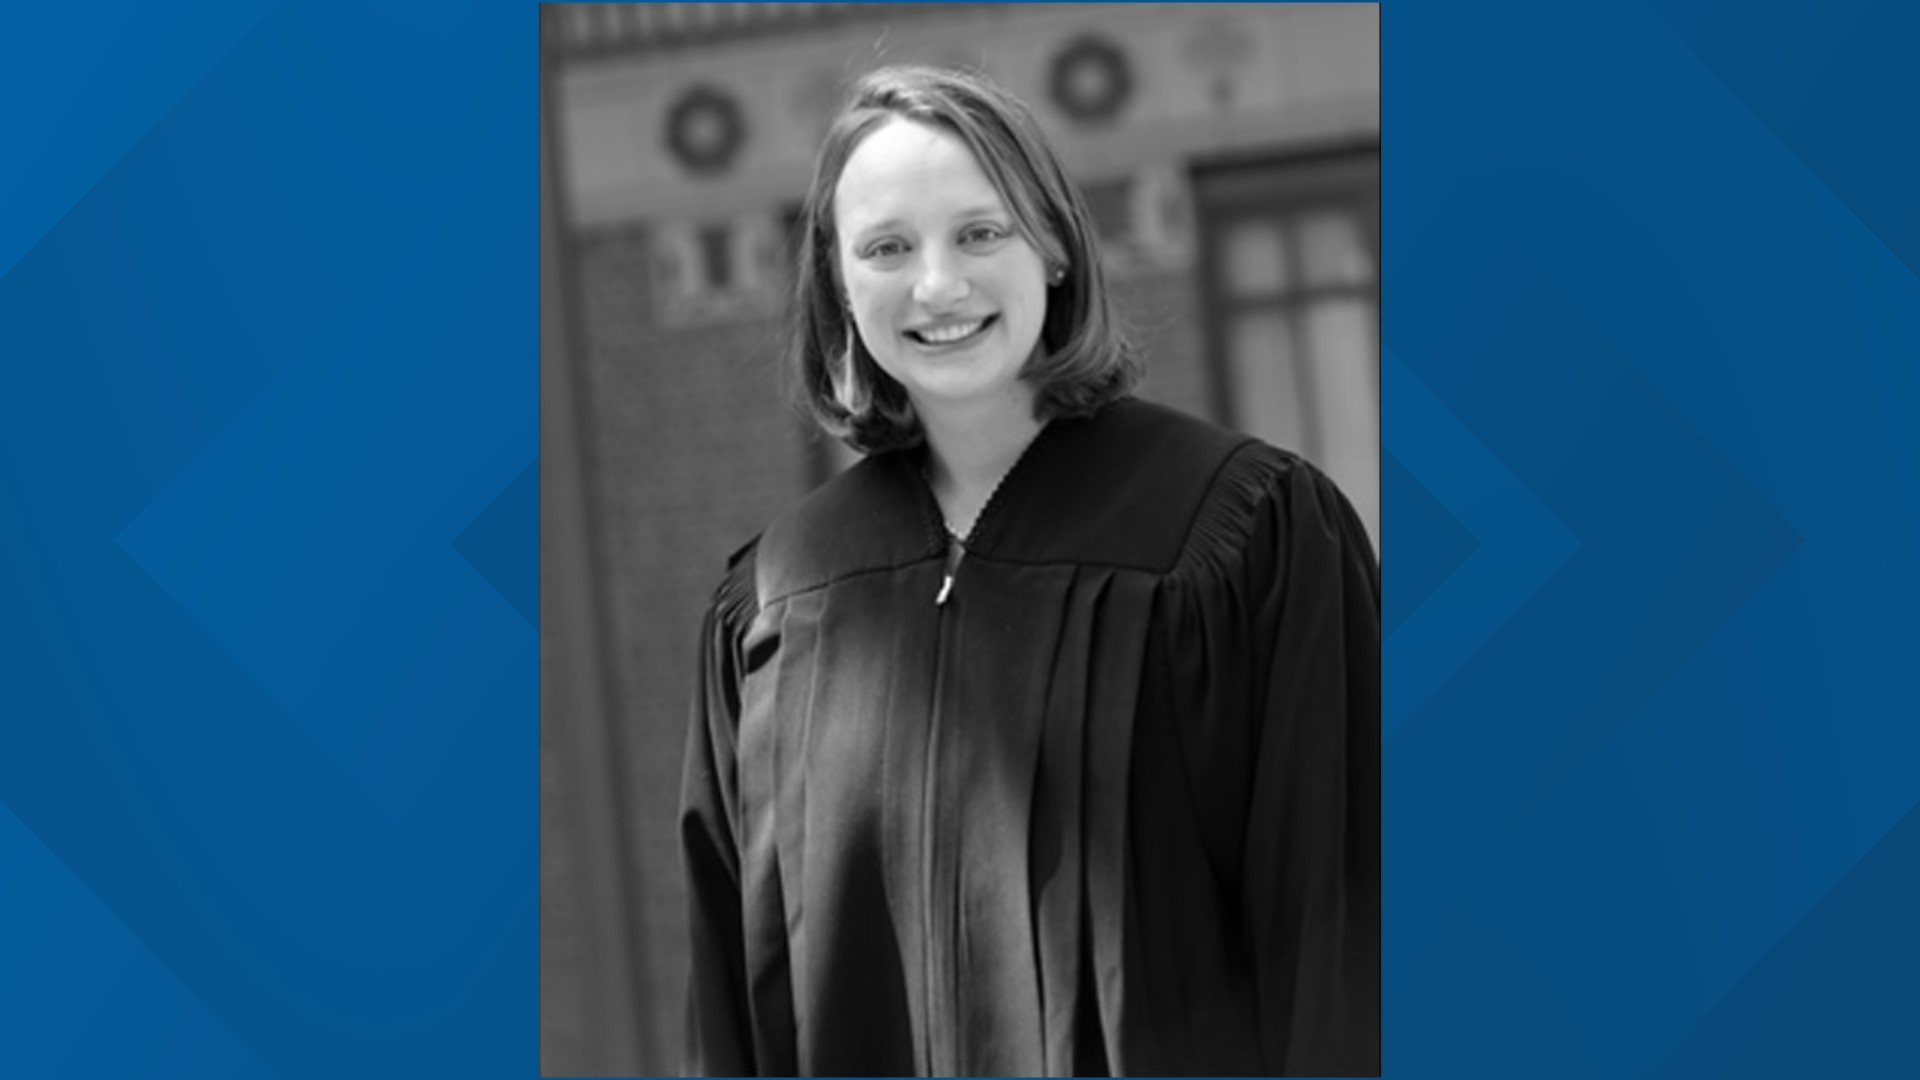 Judge Karoline Mehalchick is the Chief United States Magistrate Judge on the U.S. District Court for the Middle District of Pennsylvania.